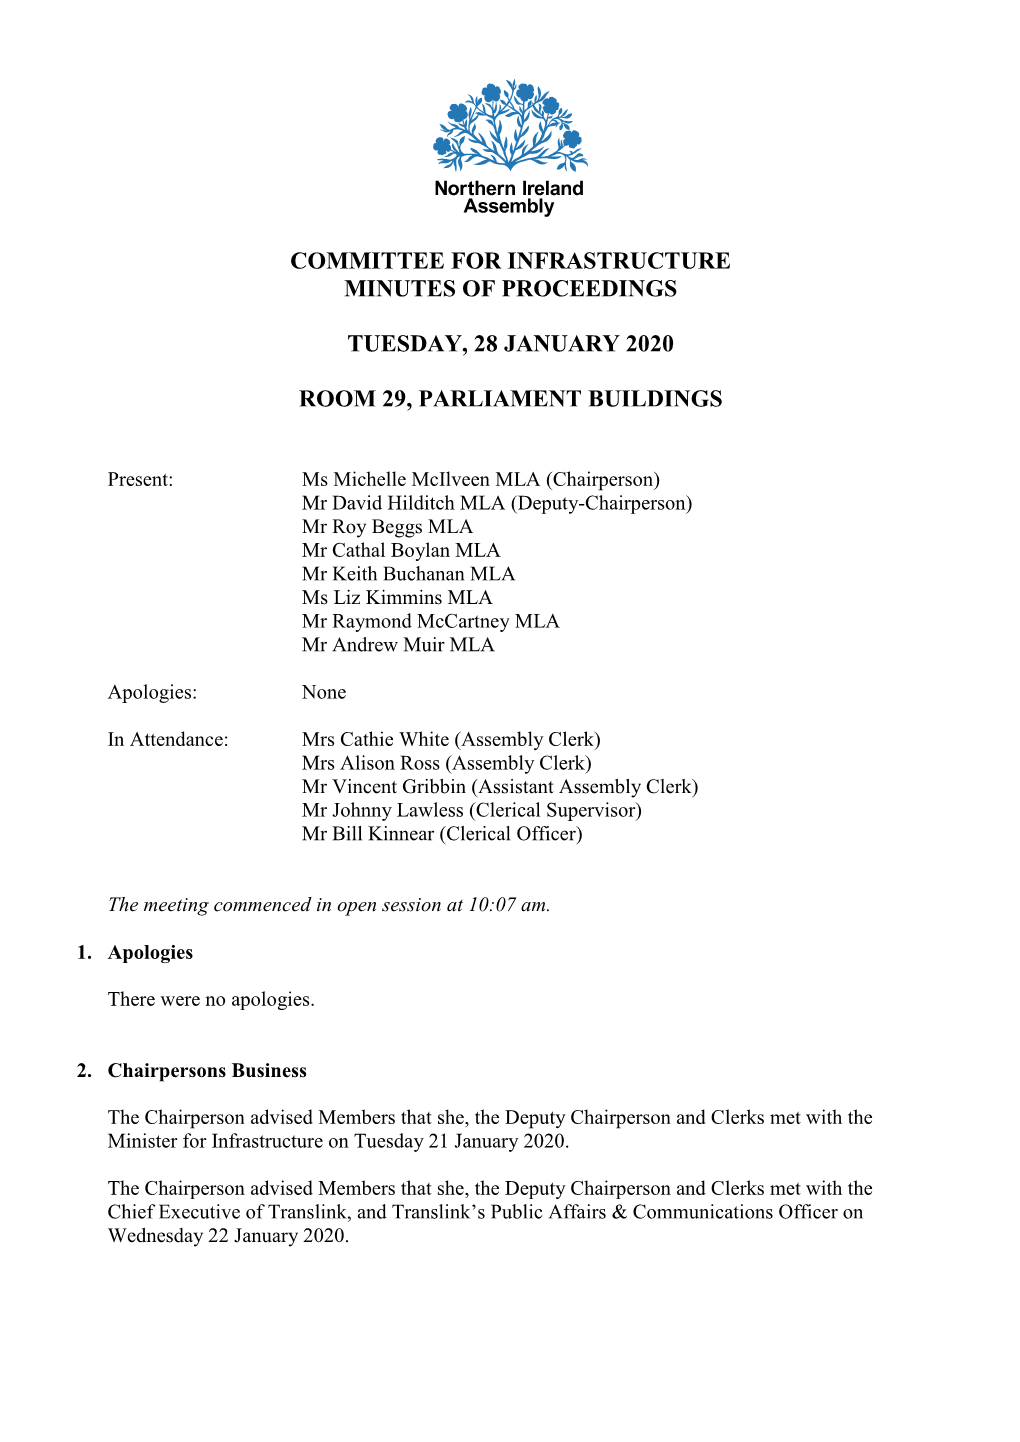 Committee for Infrastructure Minutes of Proceedings Tuesday, 28 January 2020 Room 29, Parliament Buildings